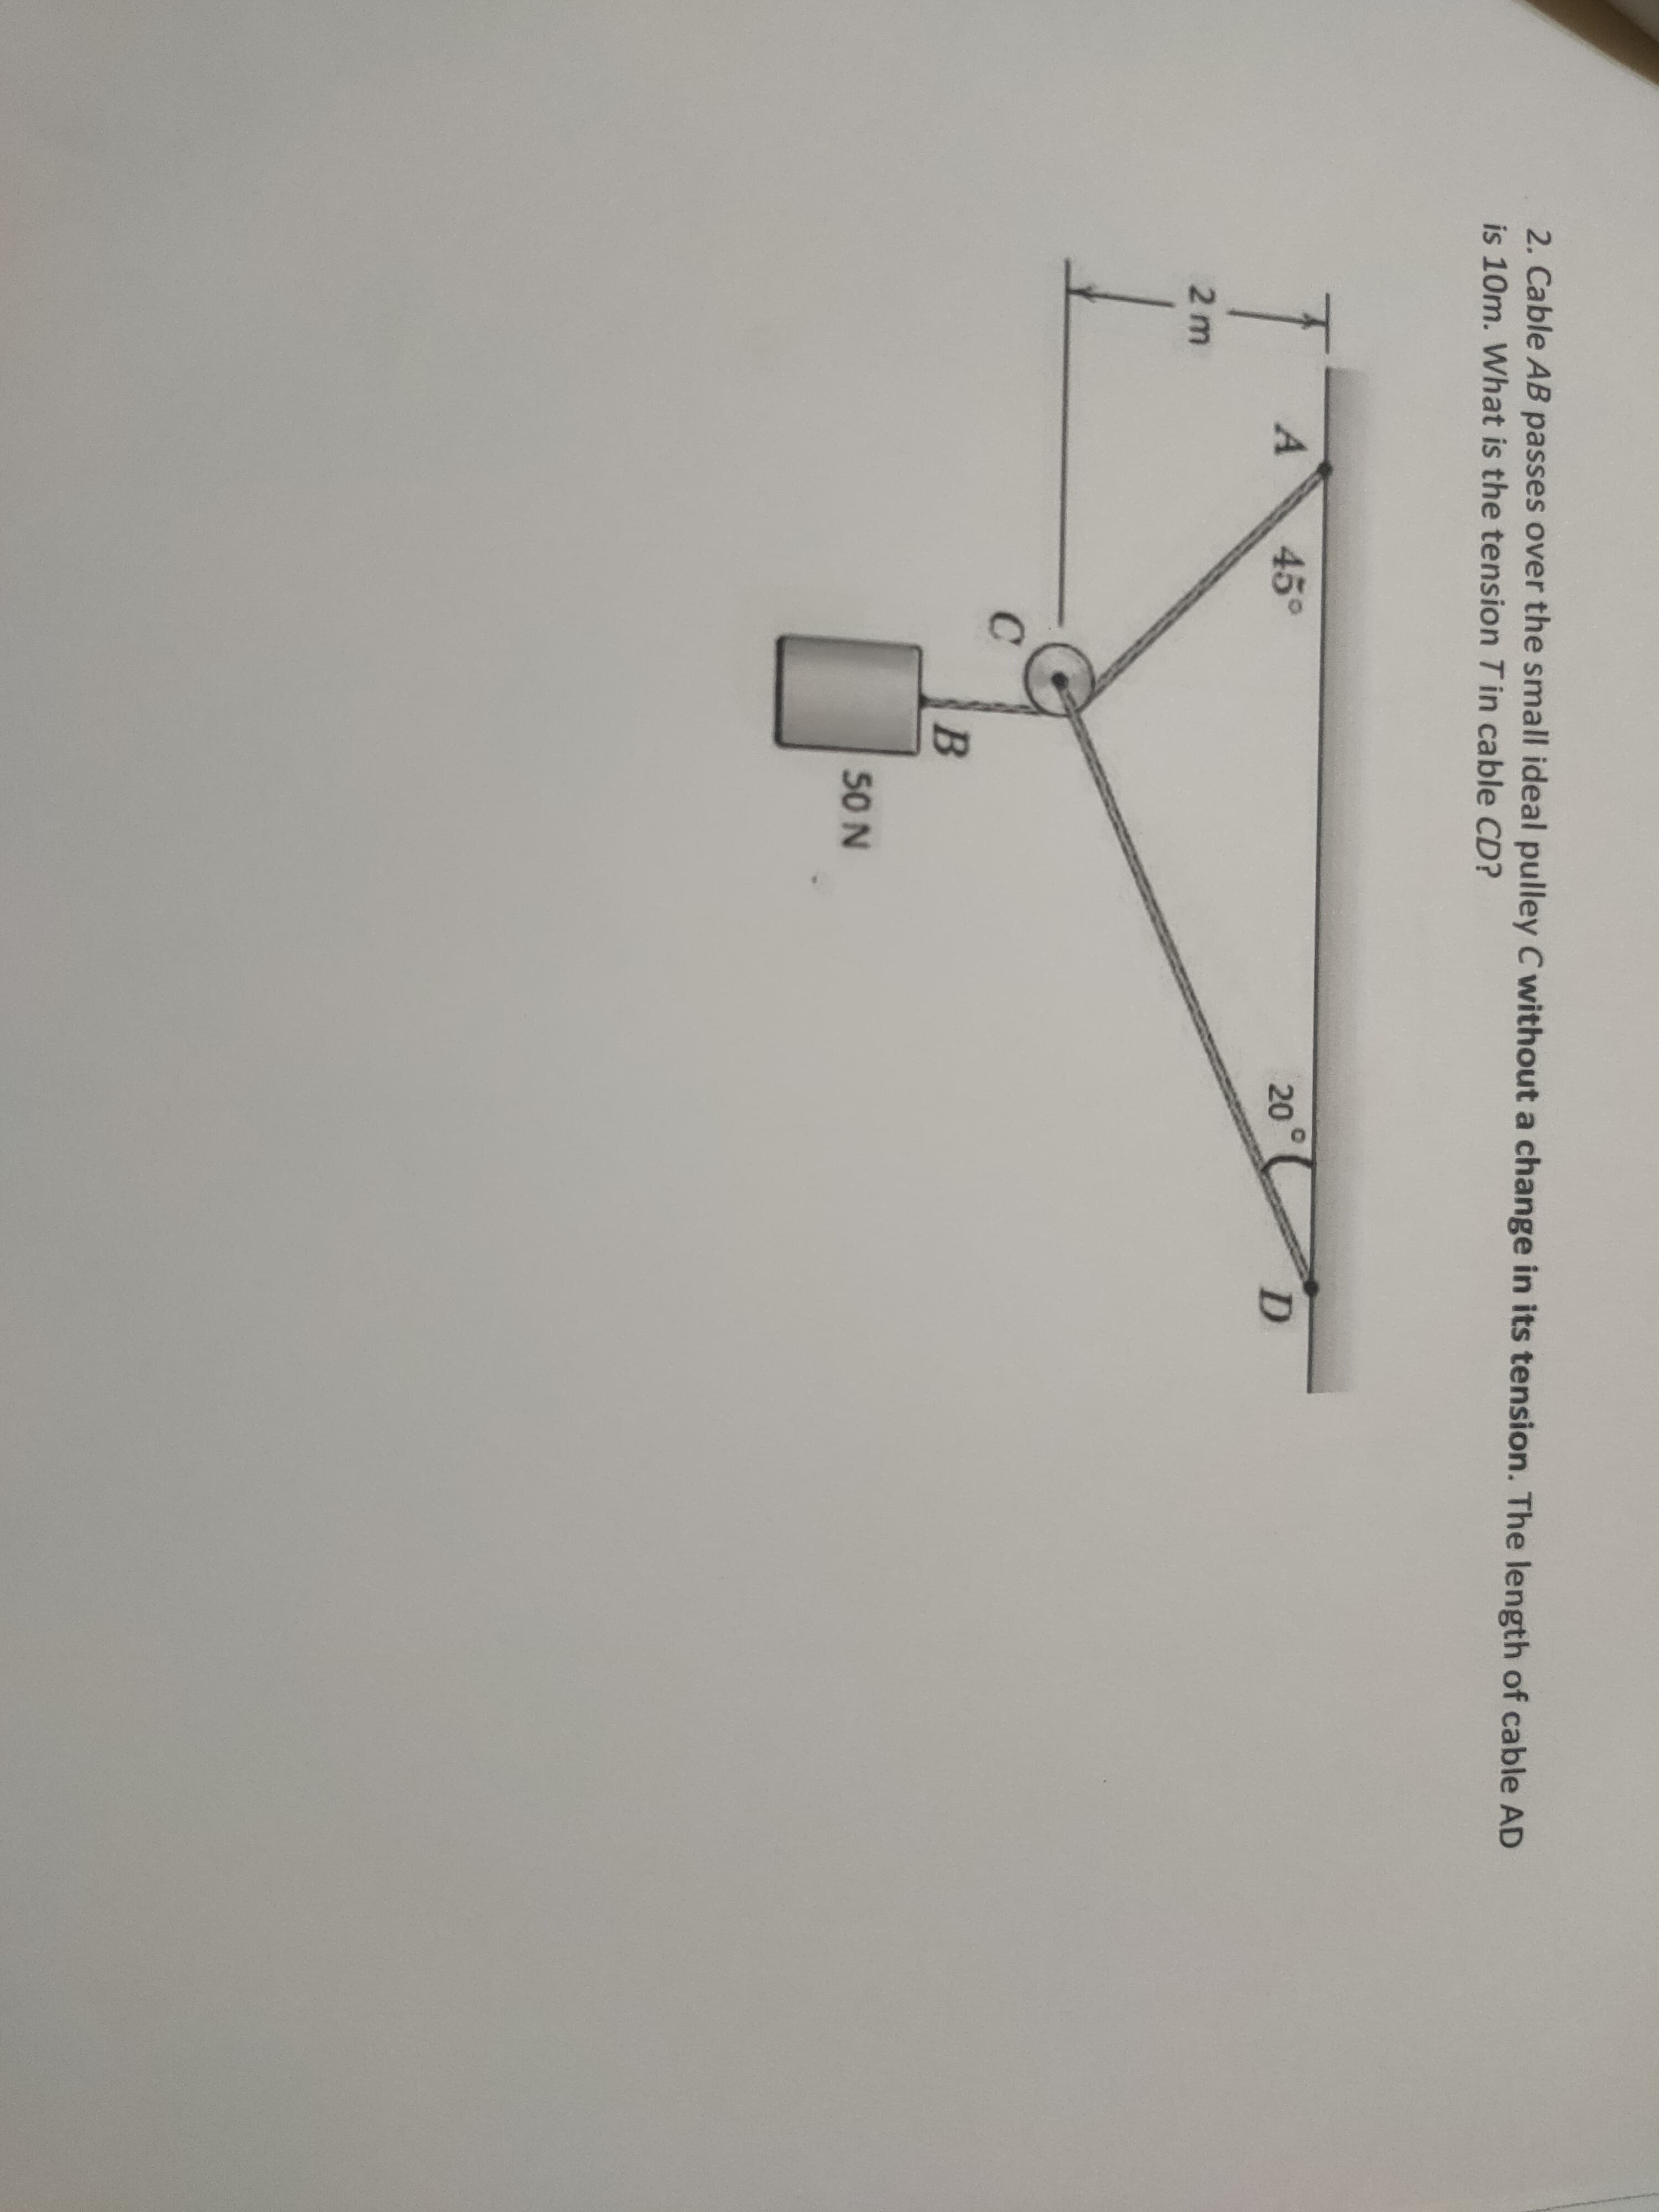 2. Cable AB passes over the small ideal pulley C without a change in its tension. The length of cable AD
is 10m. What is the tension Tin cable CD?
